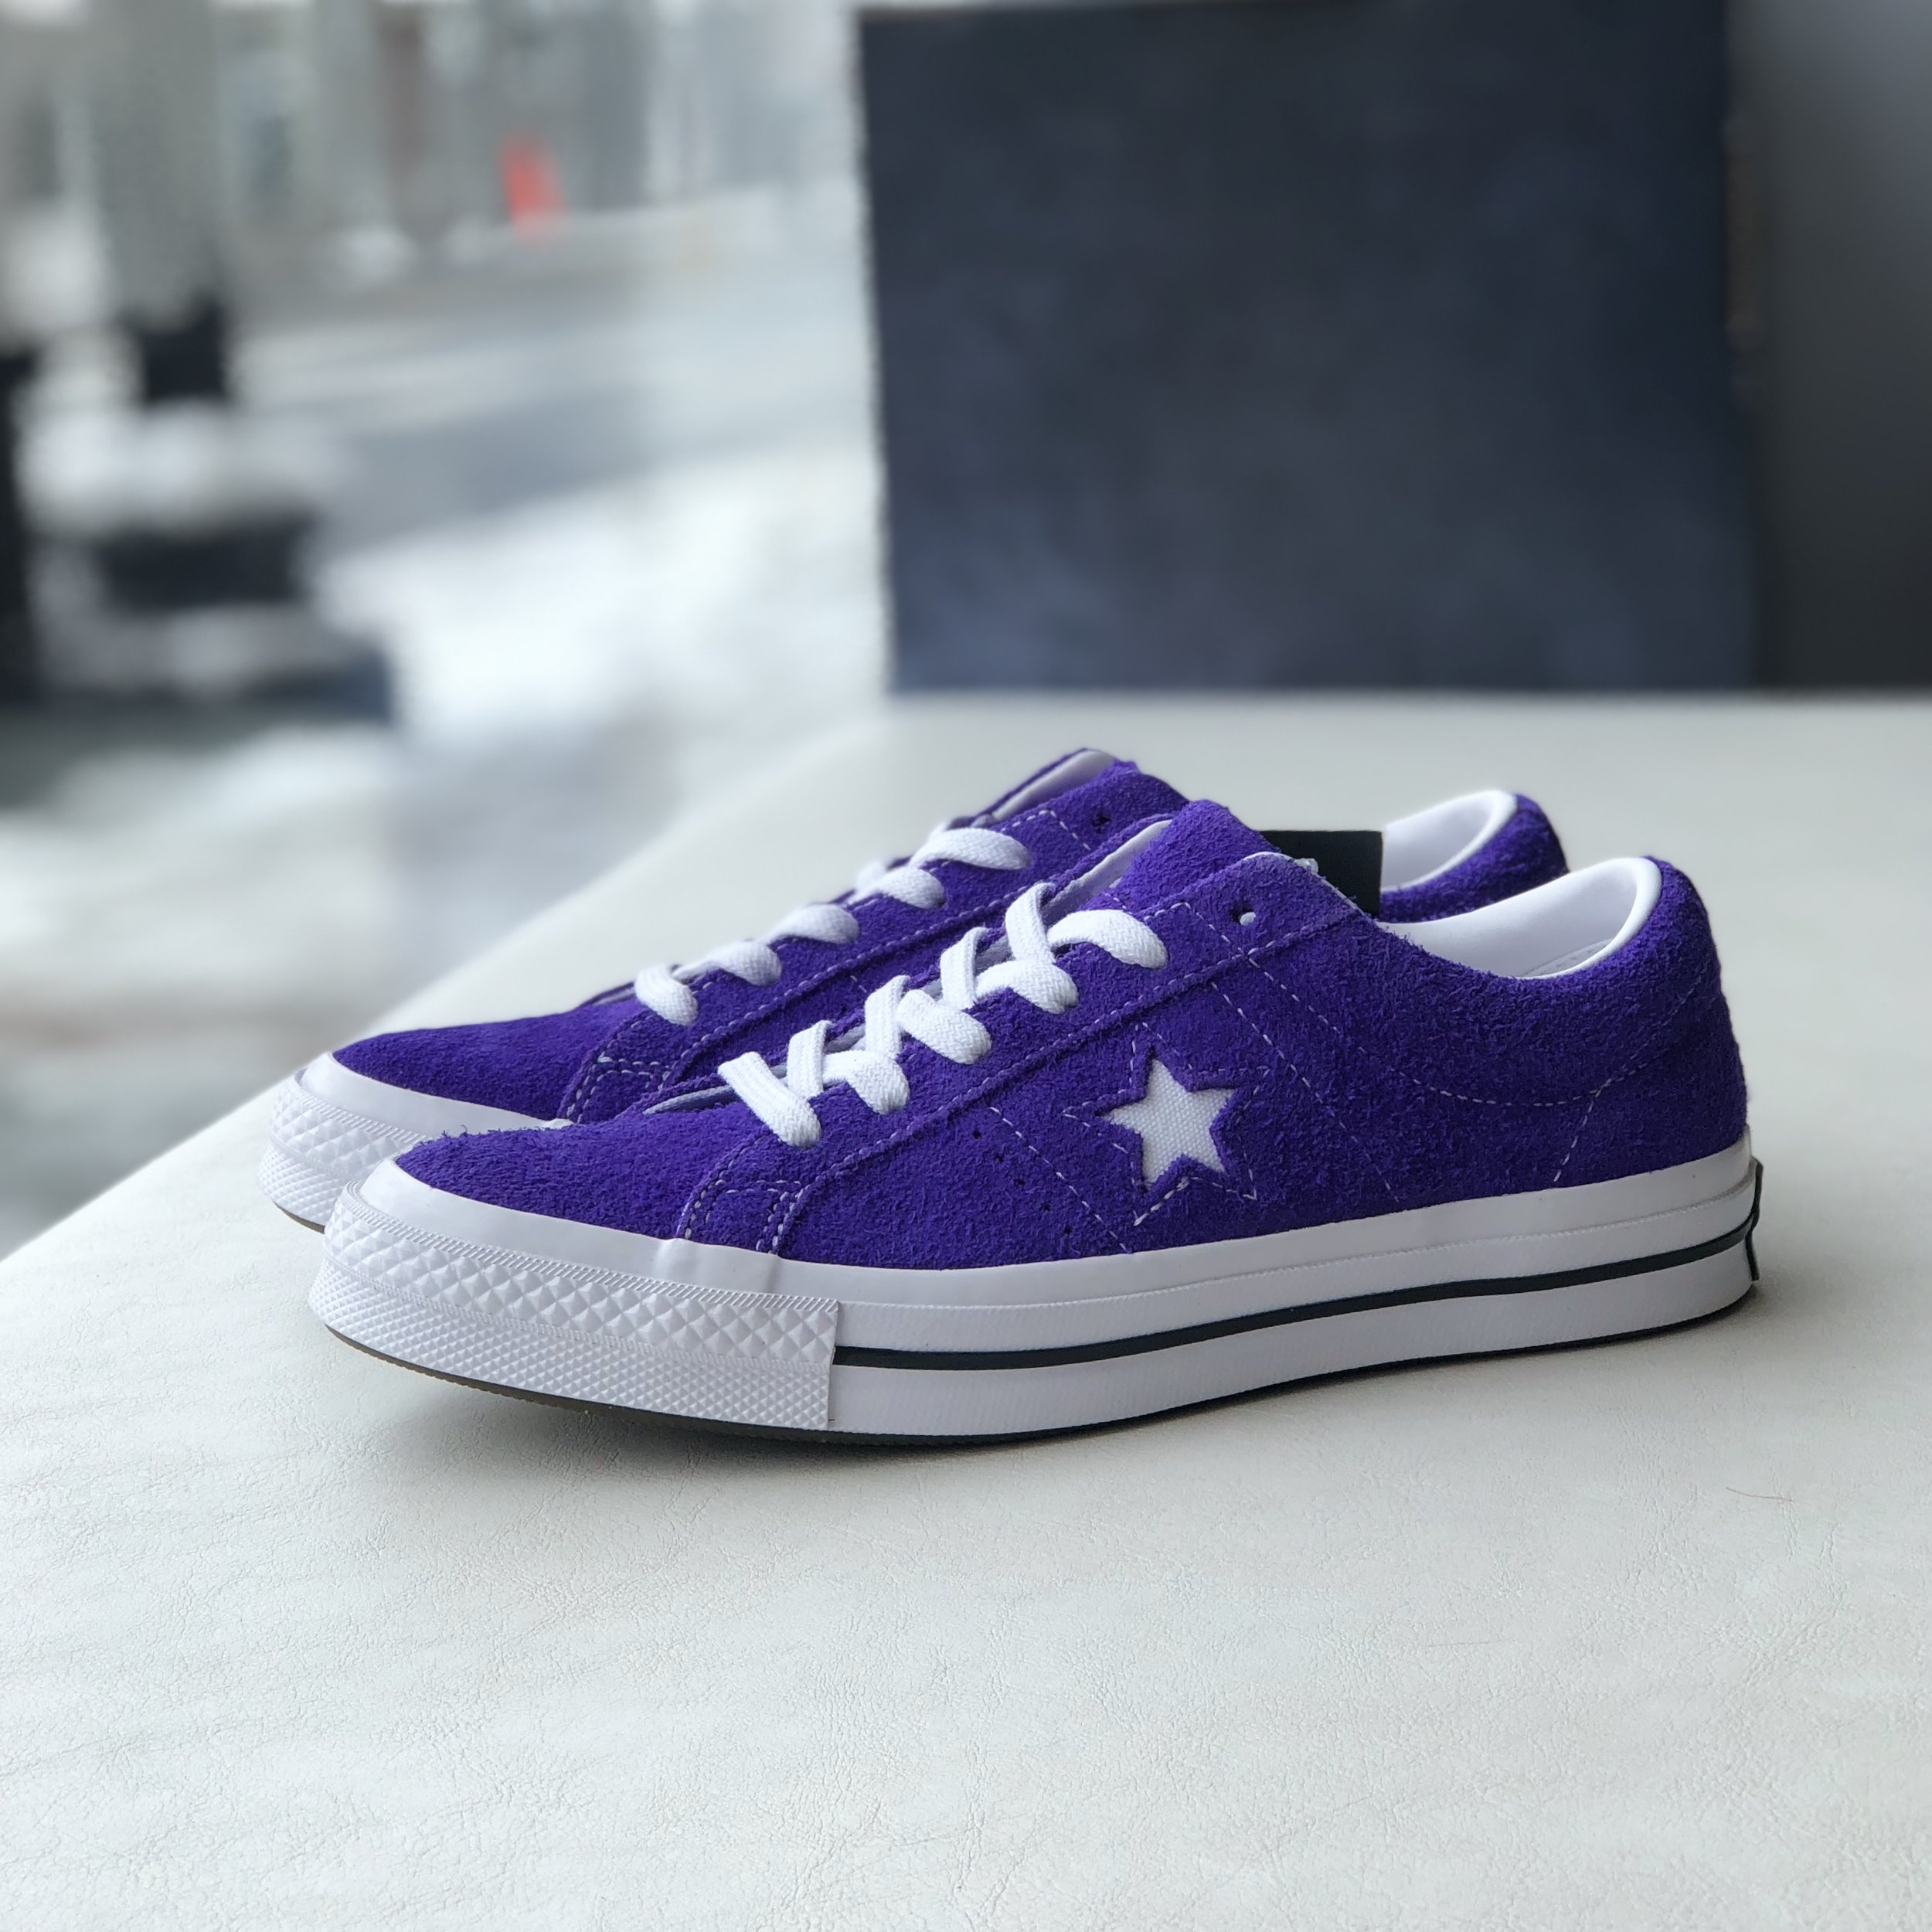 Converse One Star Premium Suede Low in 